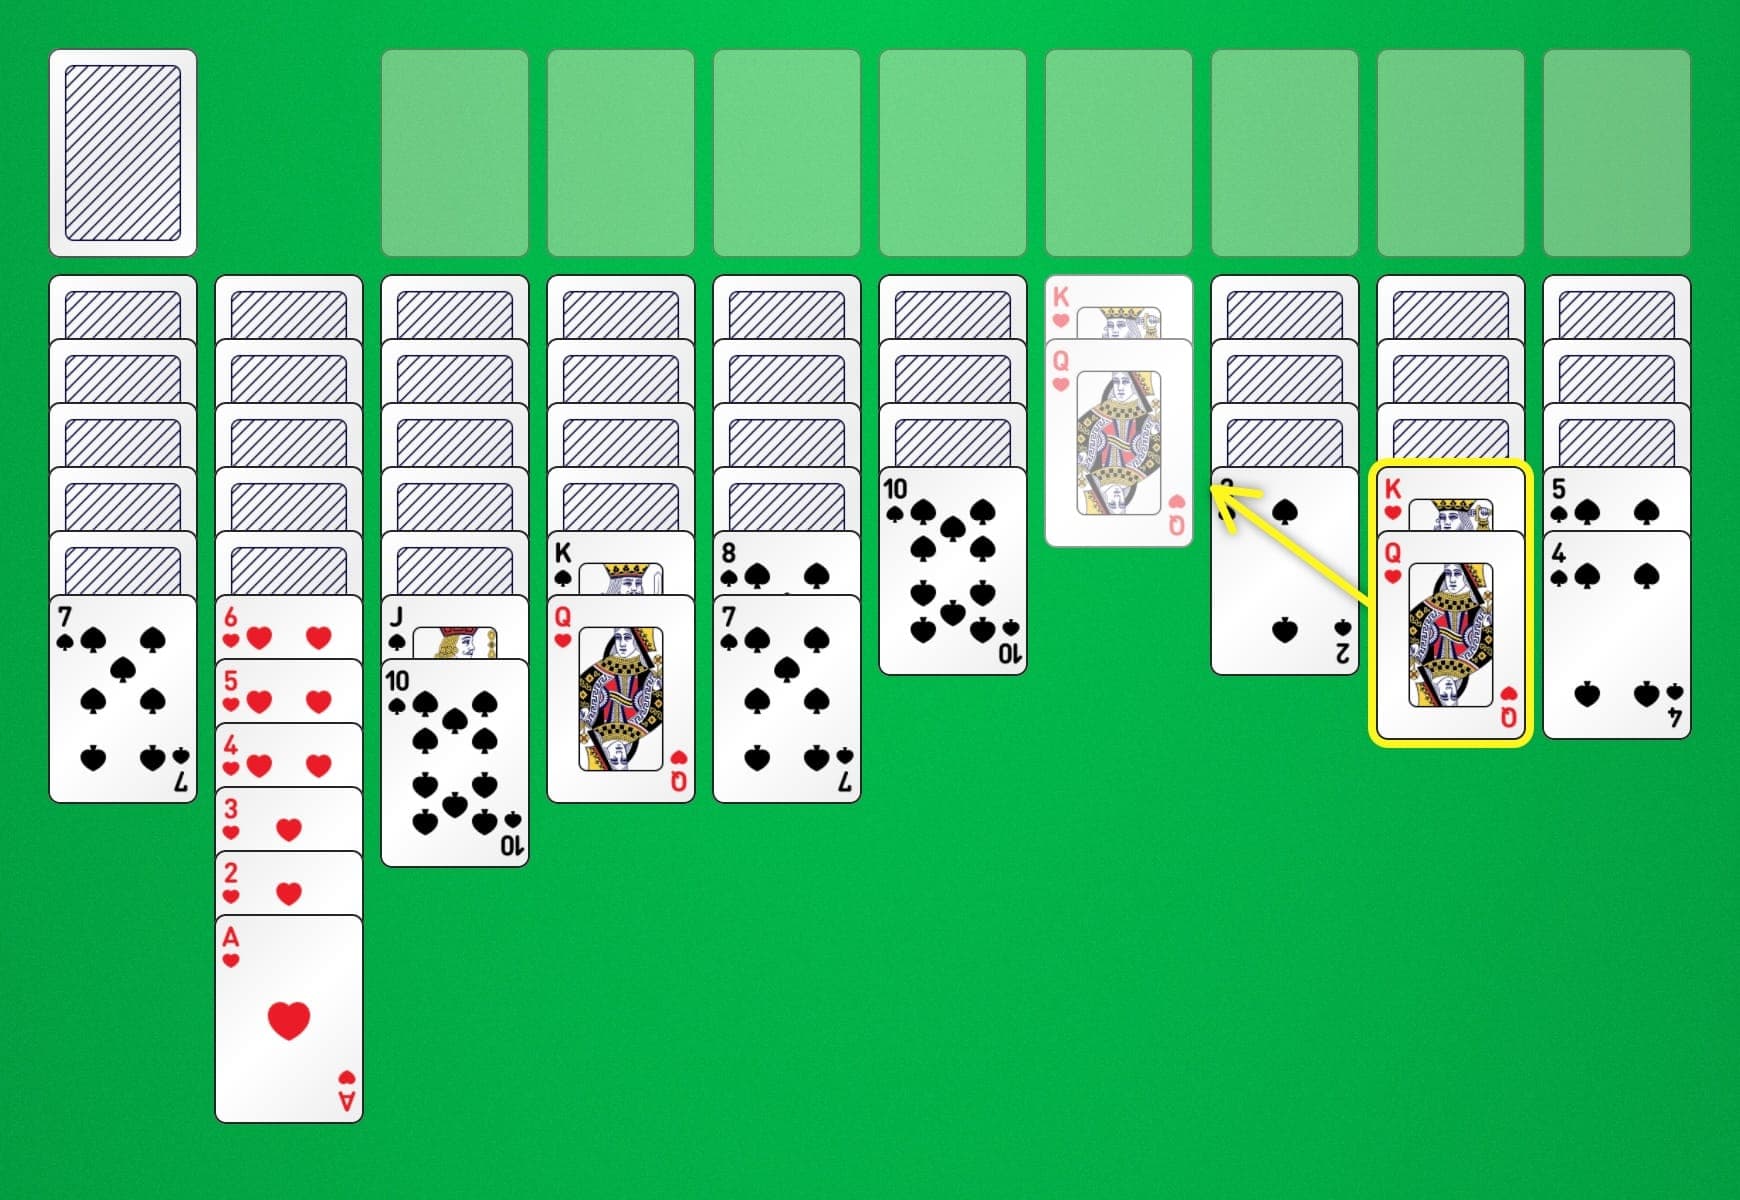 Spider Solitaire Play Online | Solitaire Games